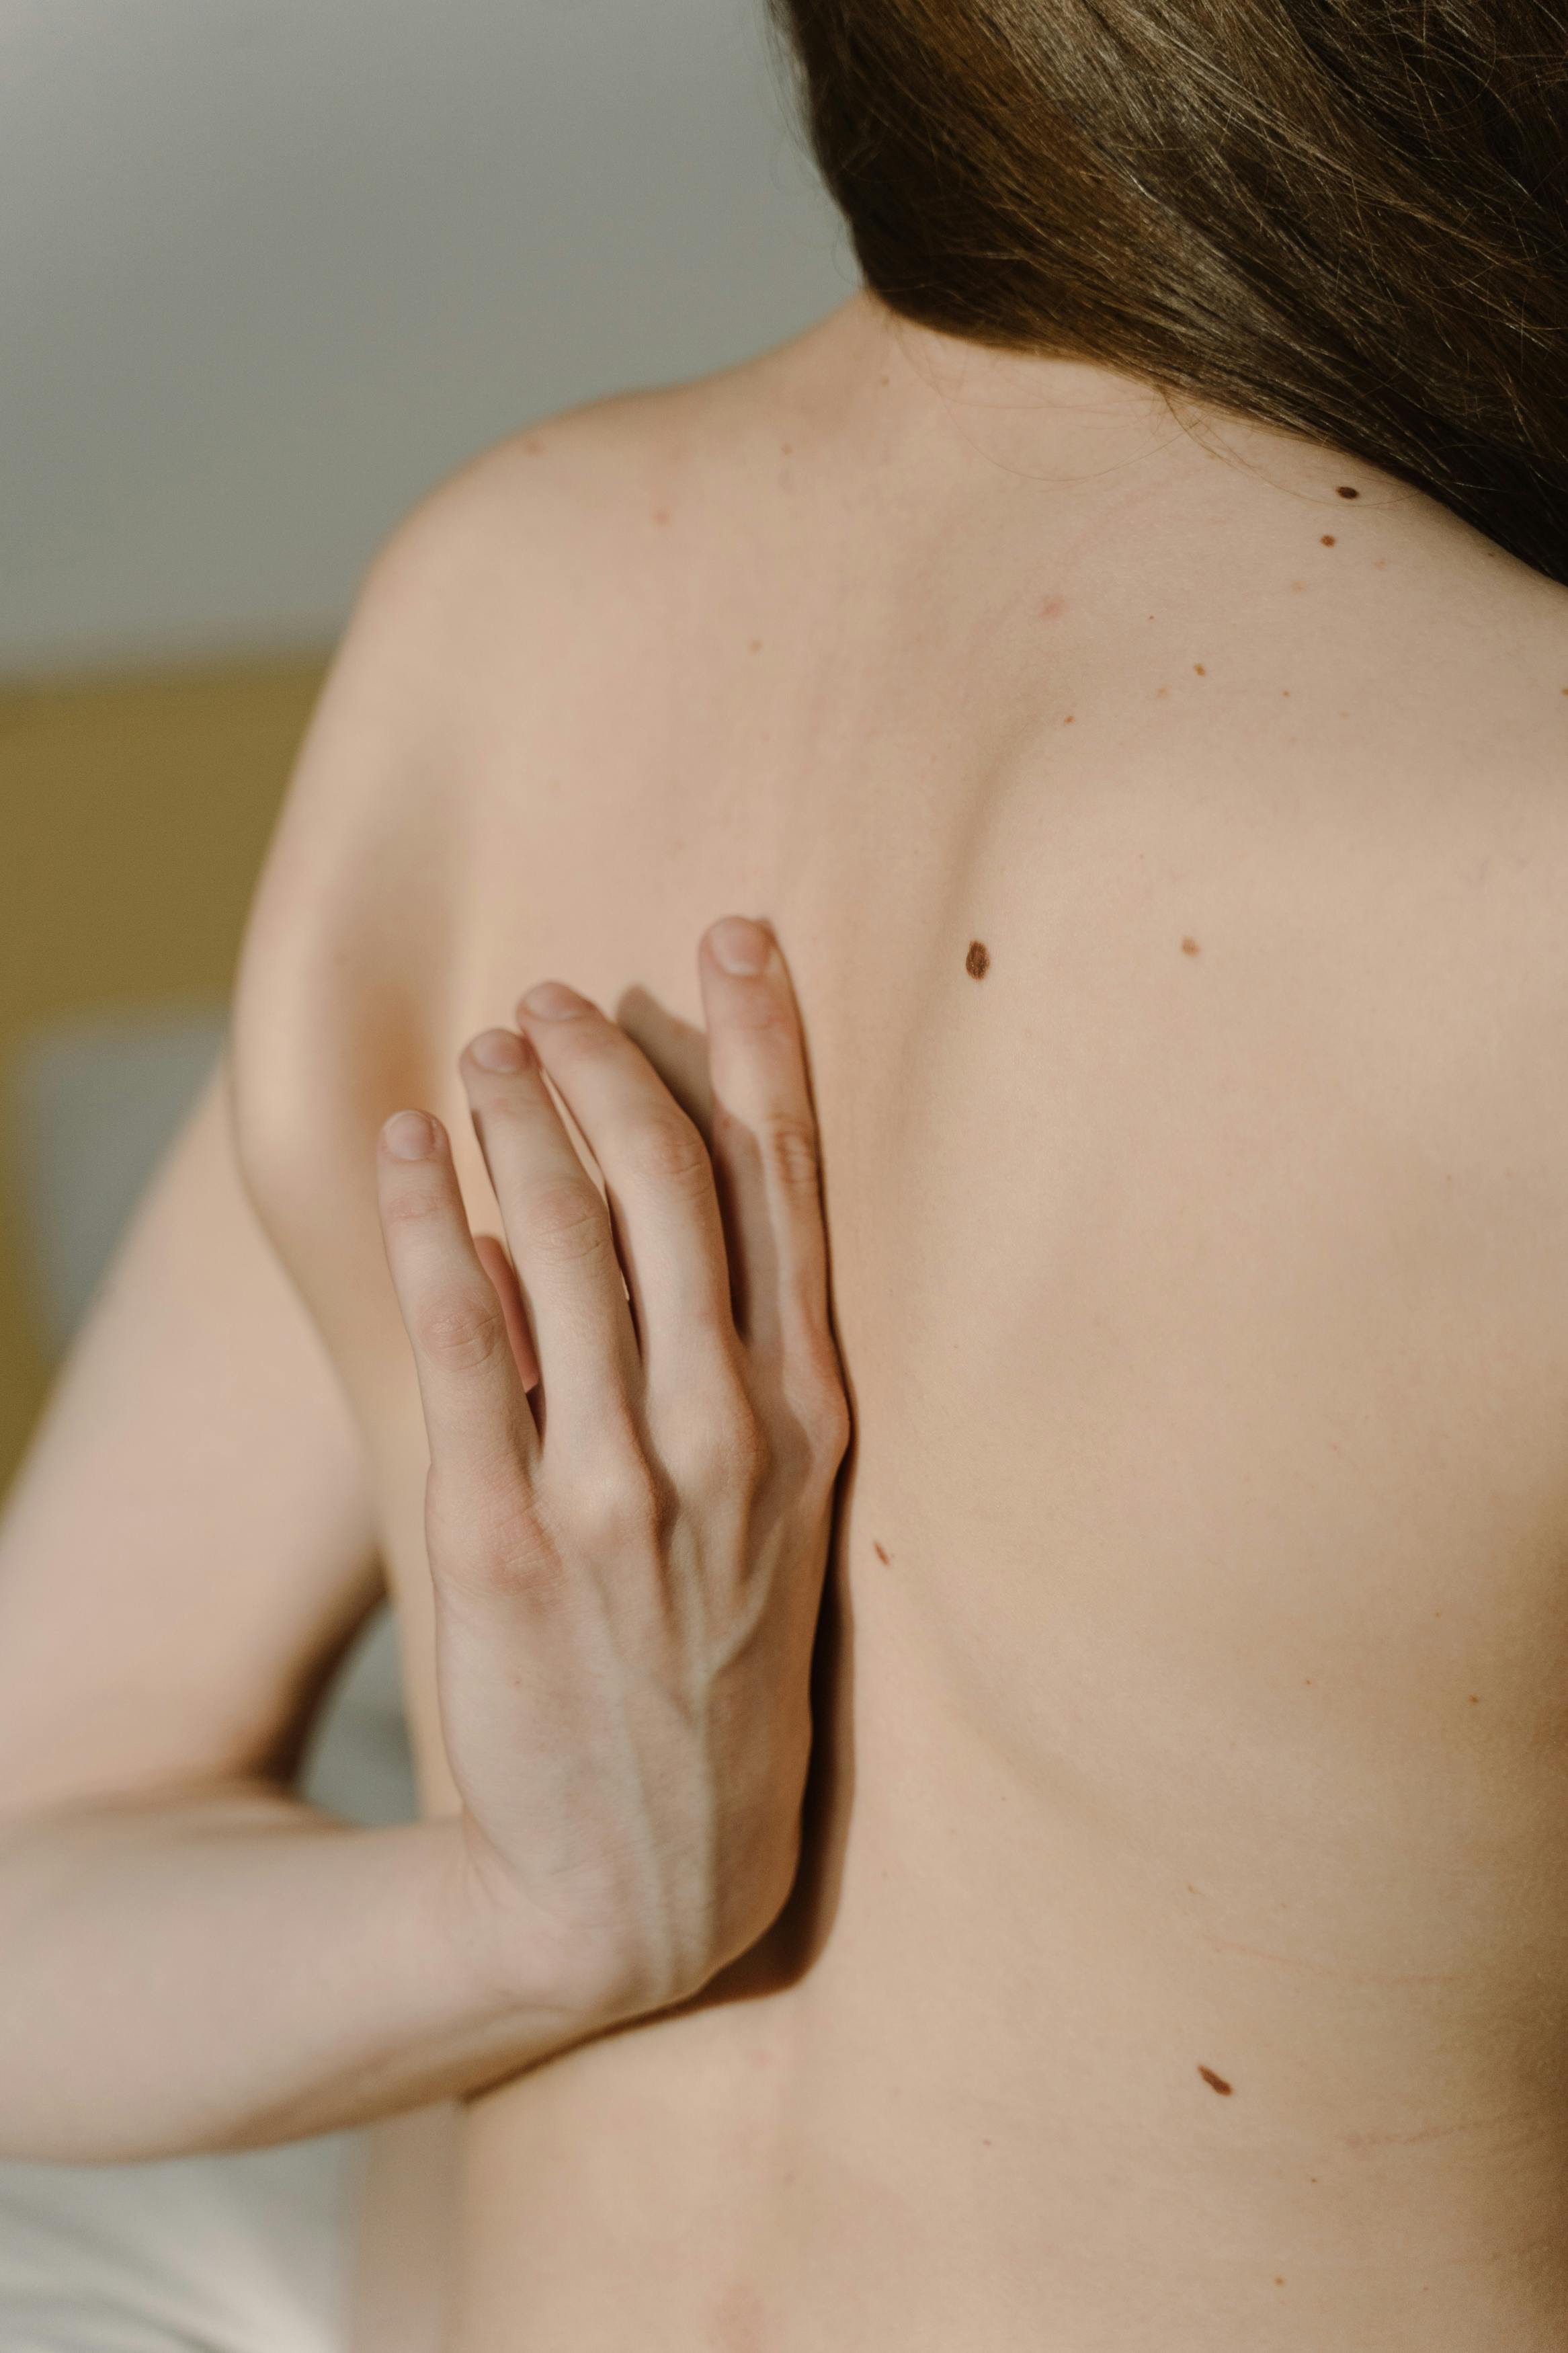 a shirtless woman touching her back